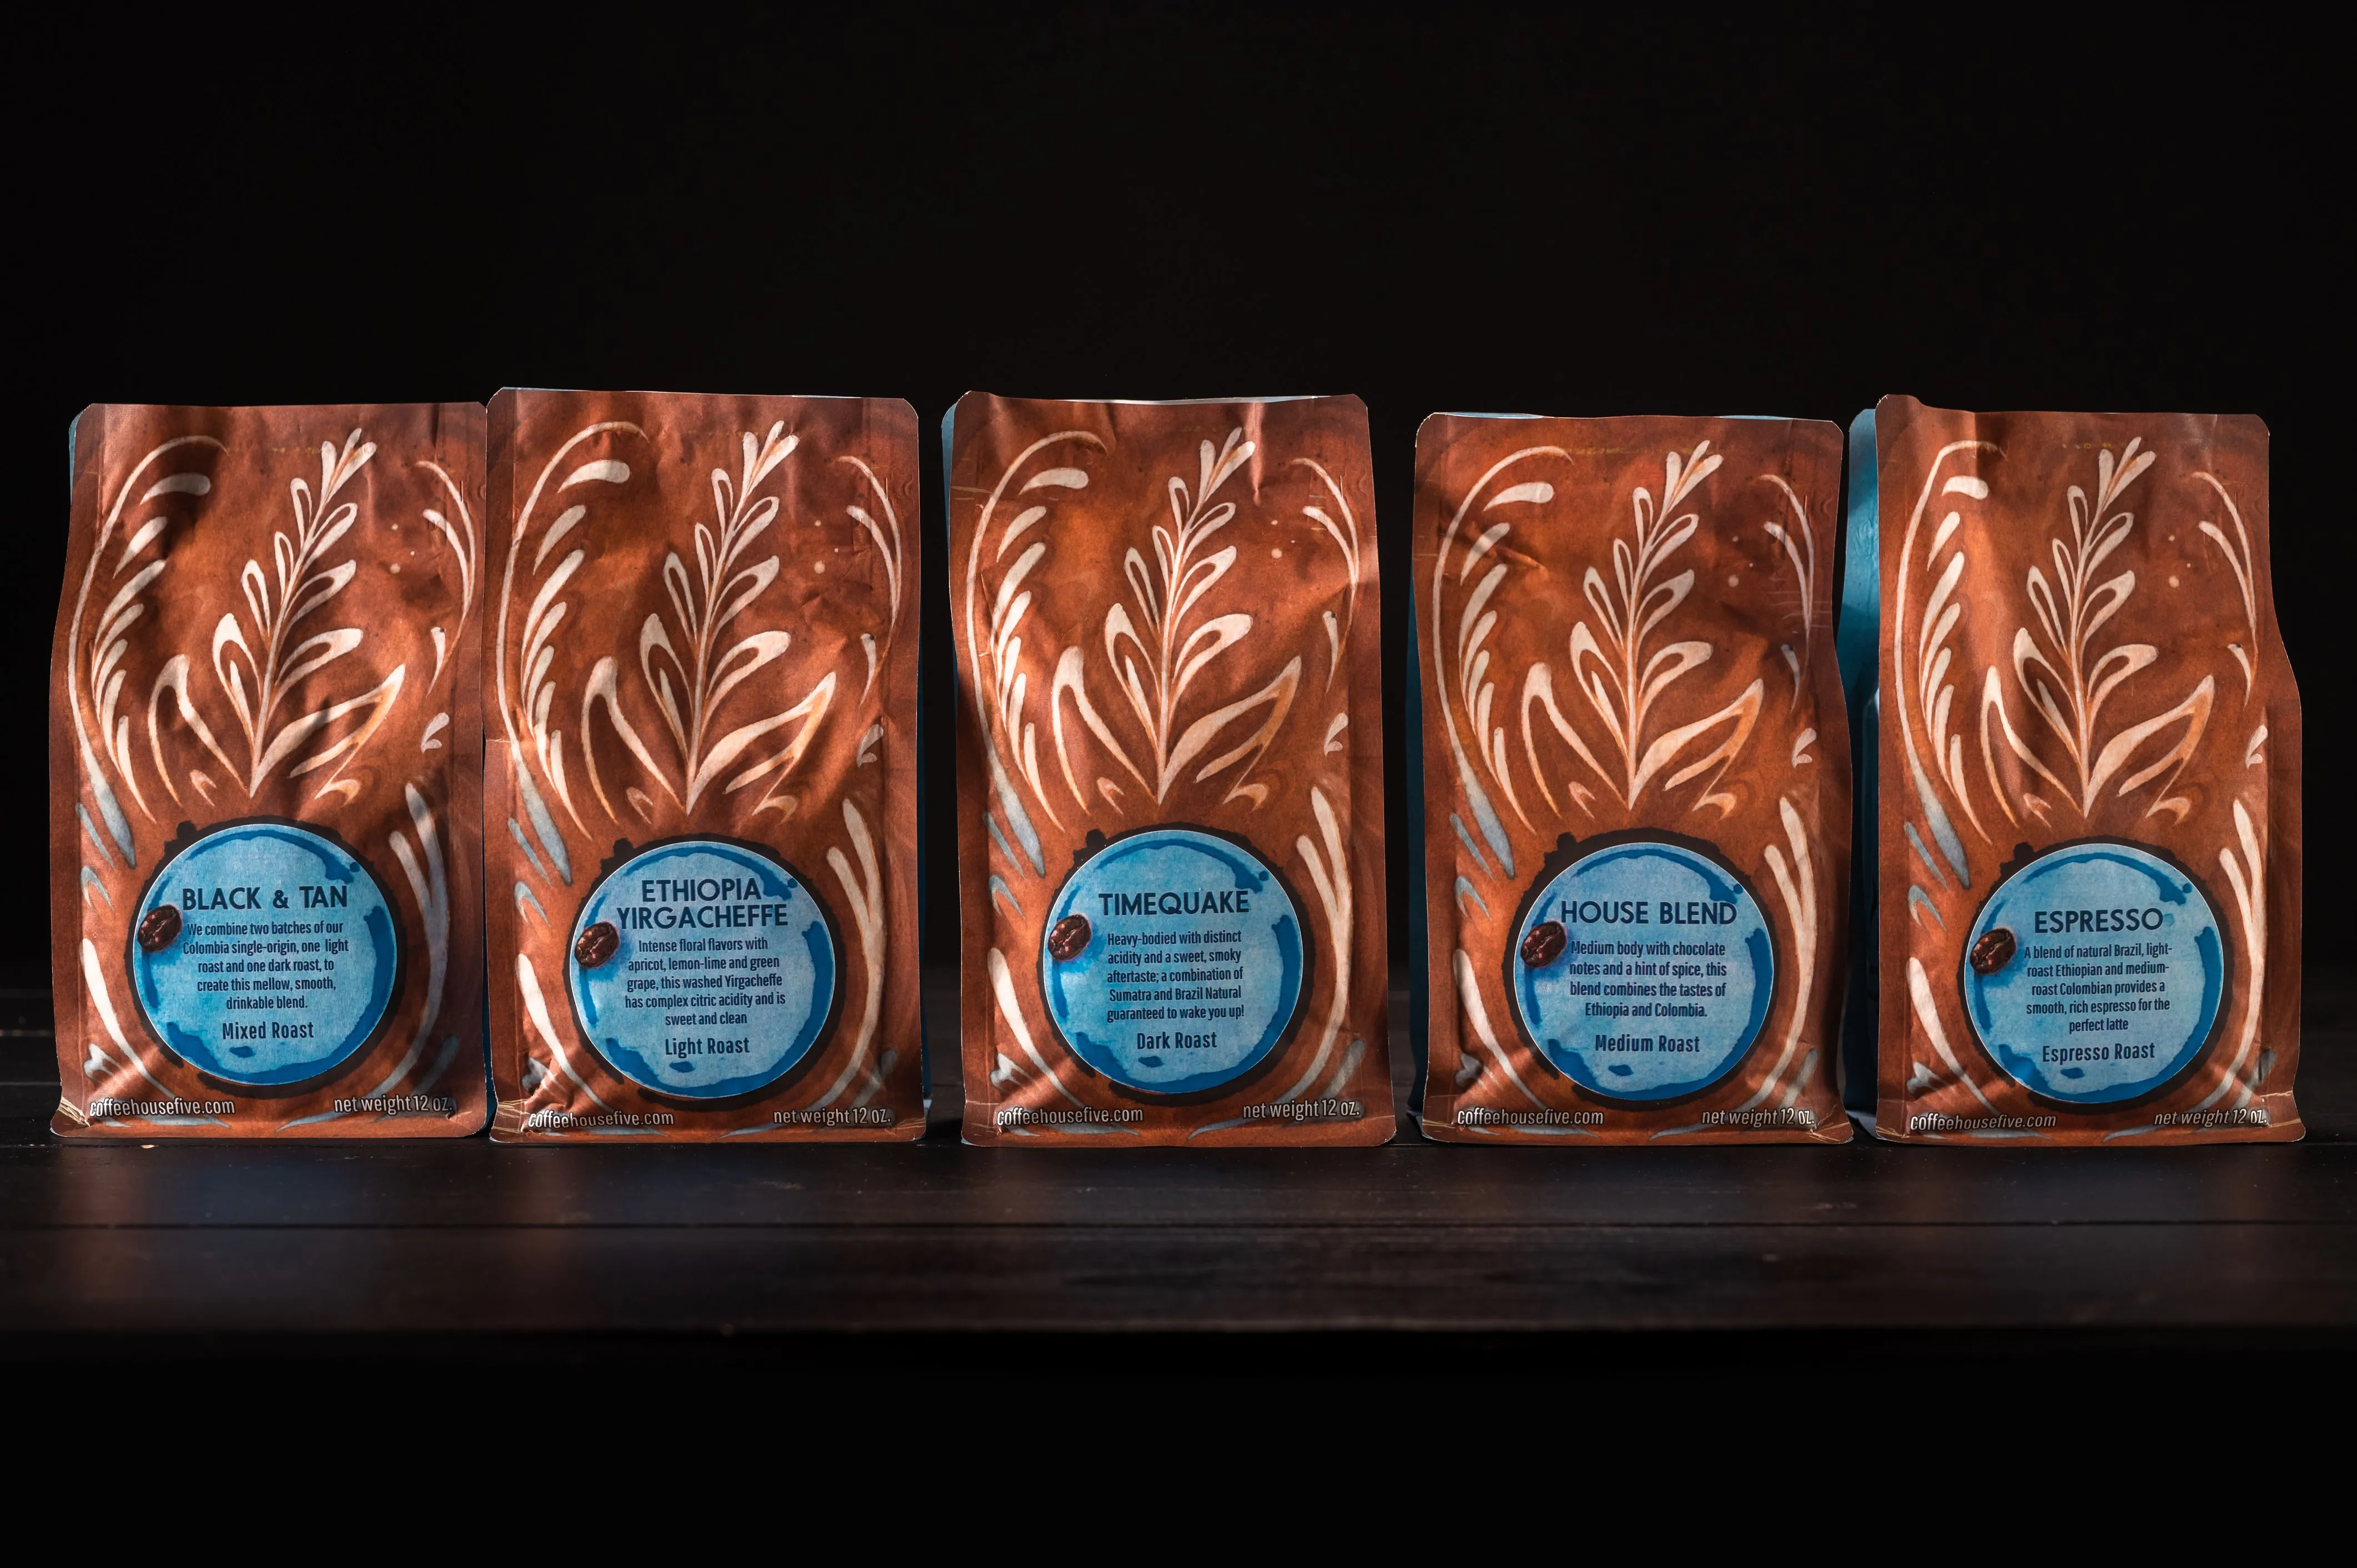 Five bags of artisanal coffee on a shelf, each with a unique blend and roast type, featuring decorative leaf patterns on a dark background.